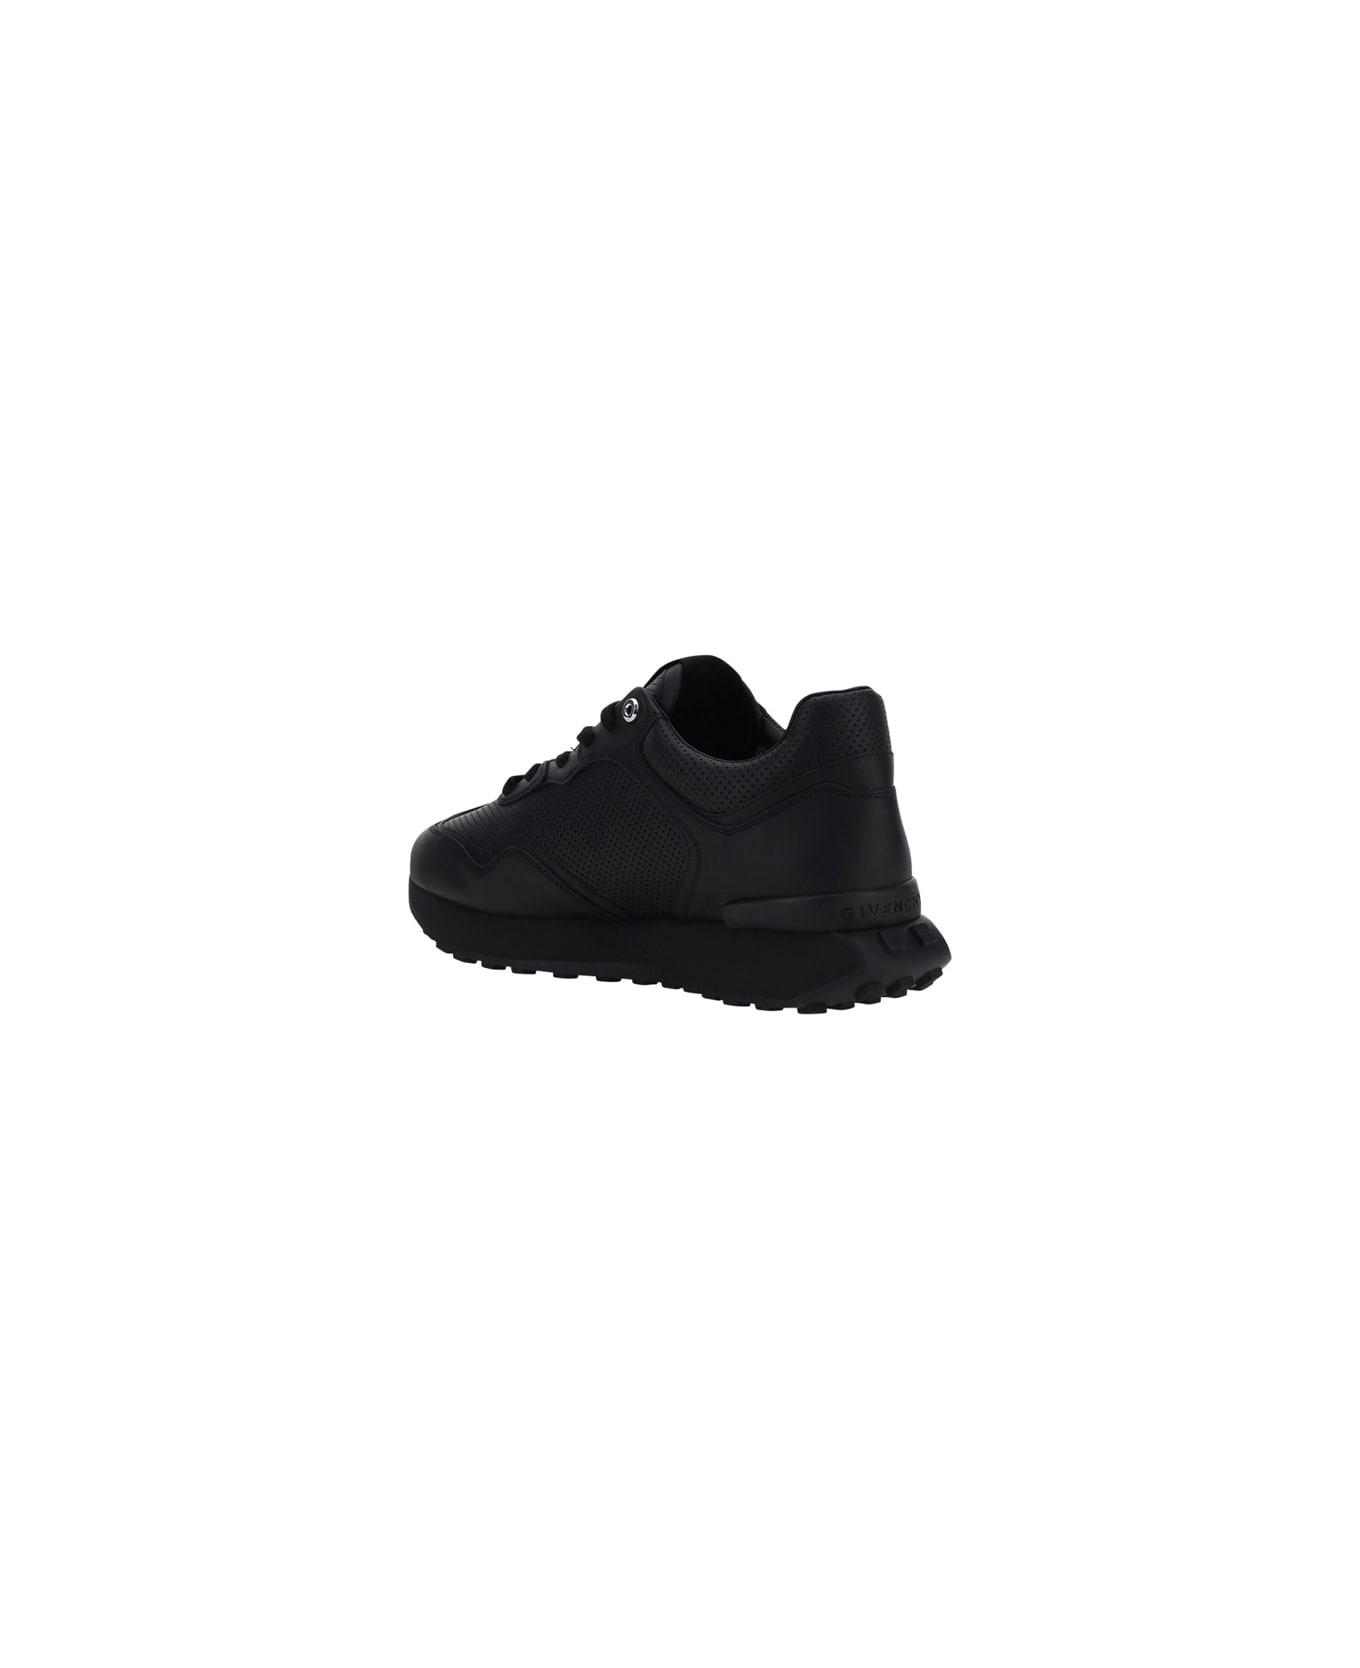 Givenchy Giv Sneakers - NERO